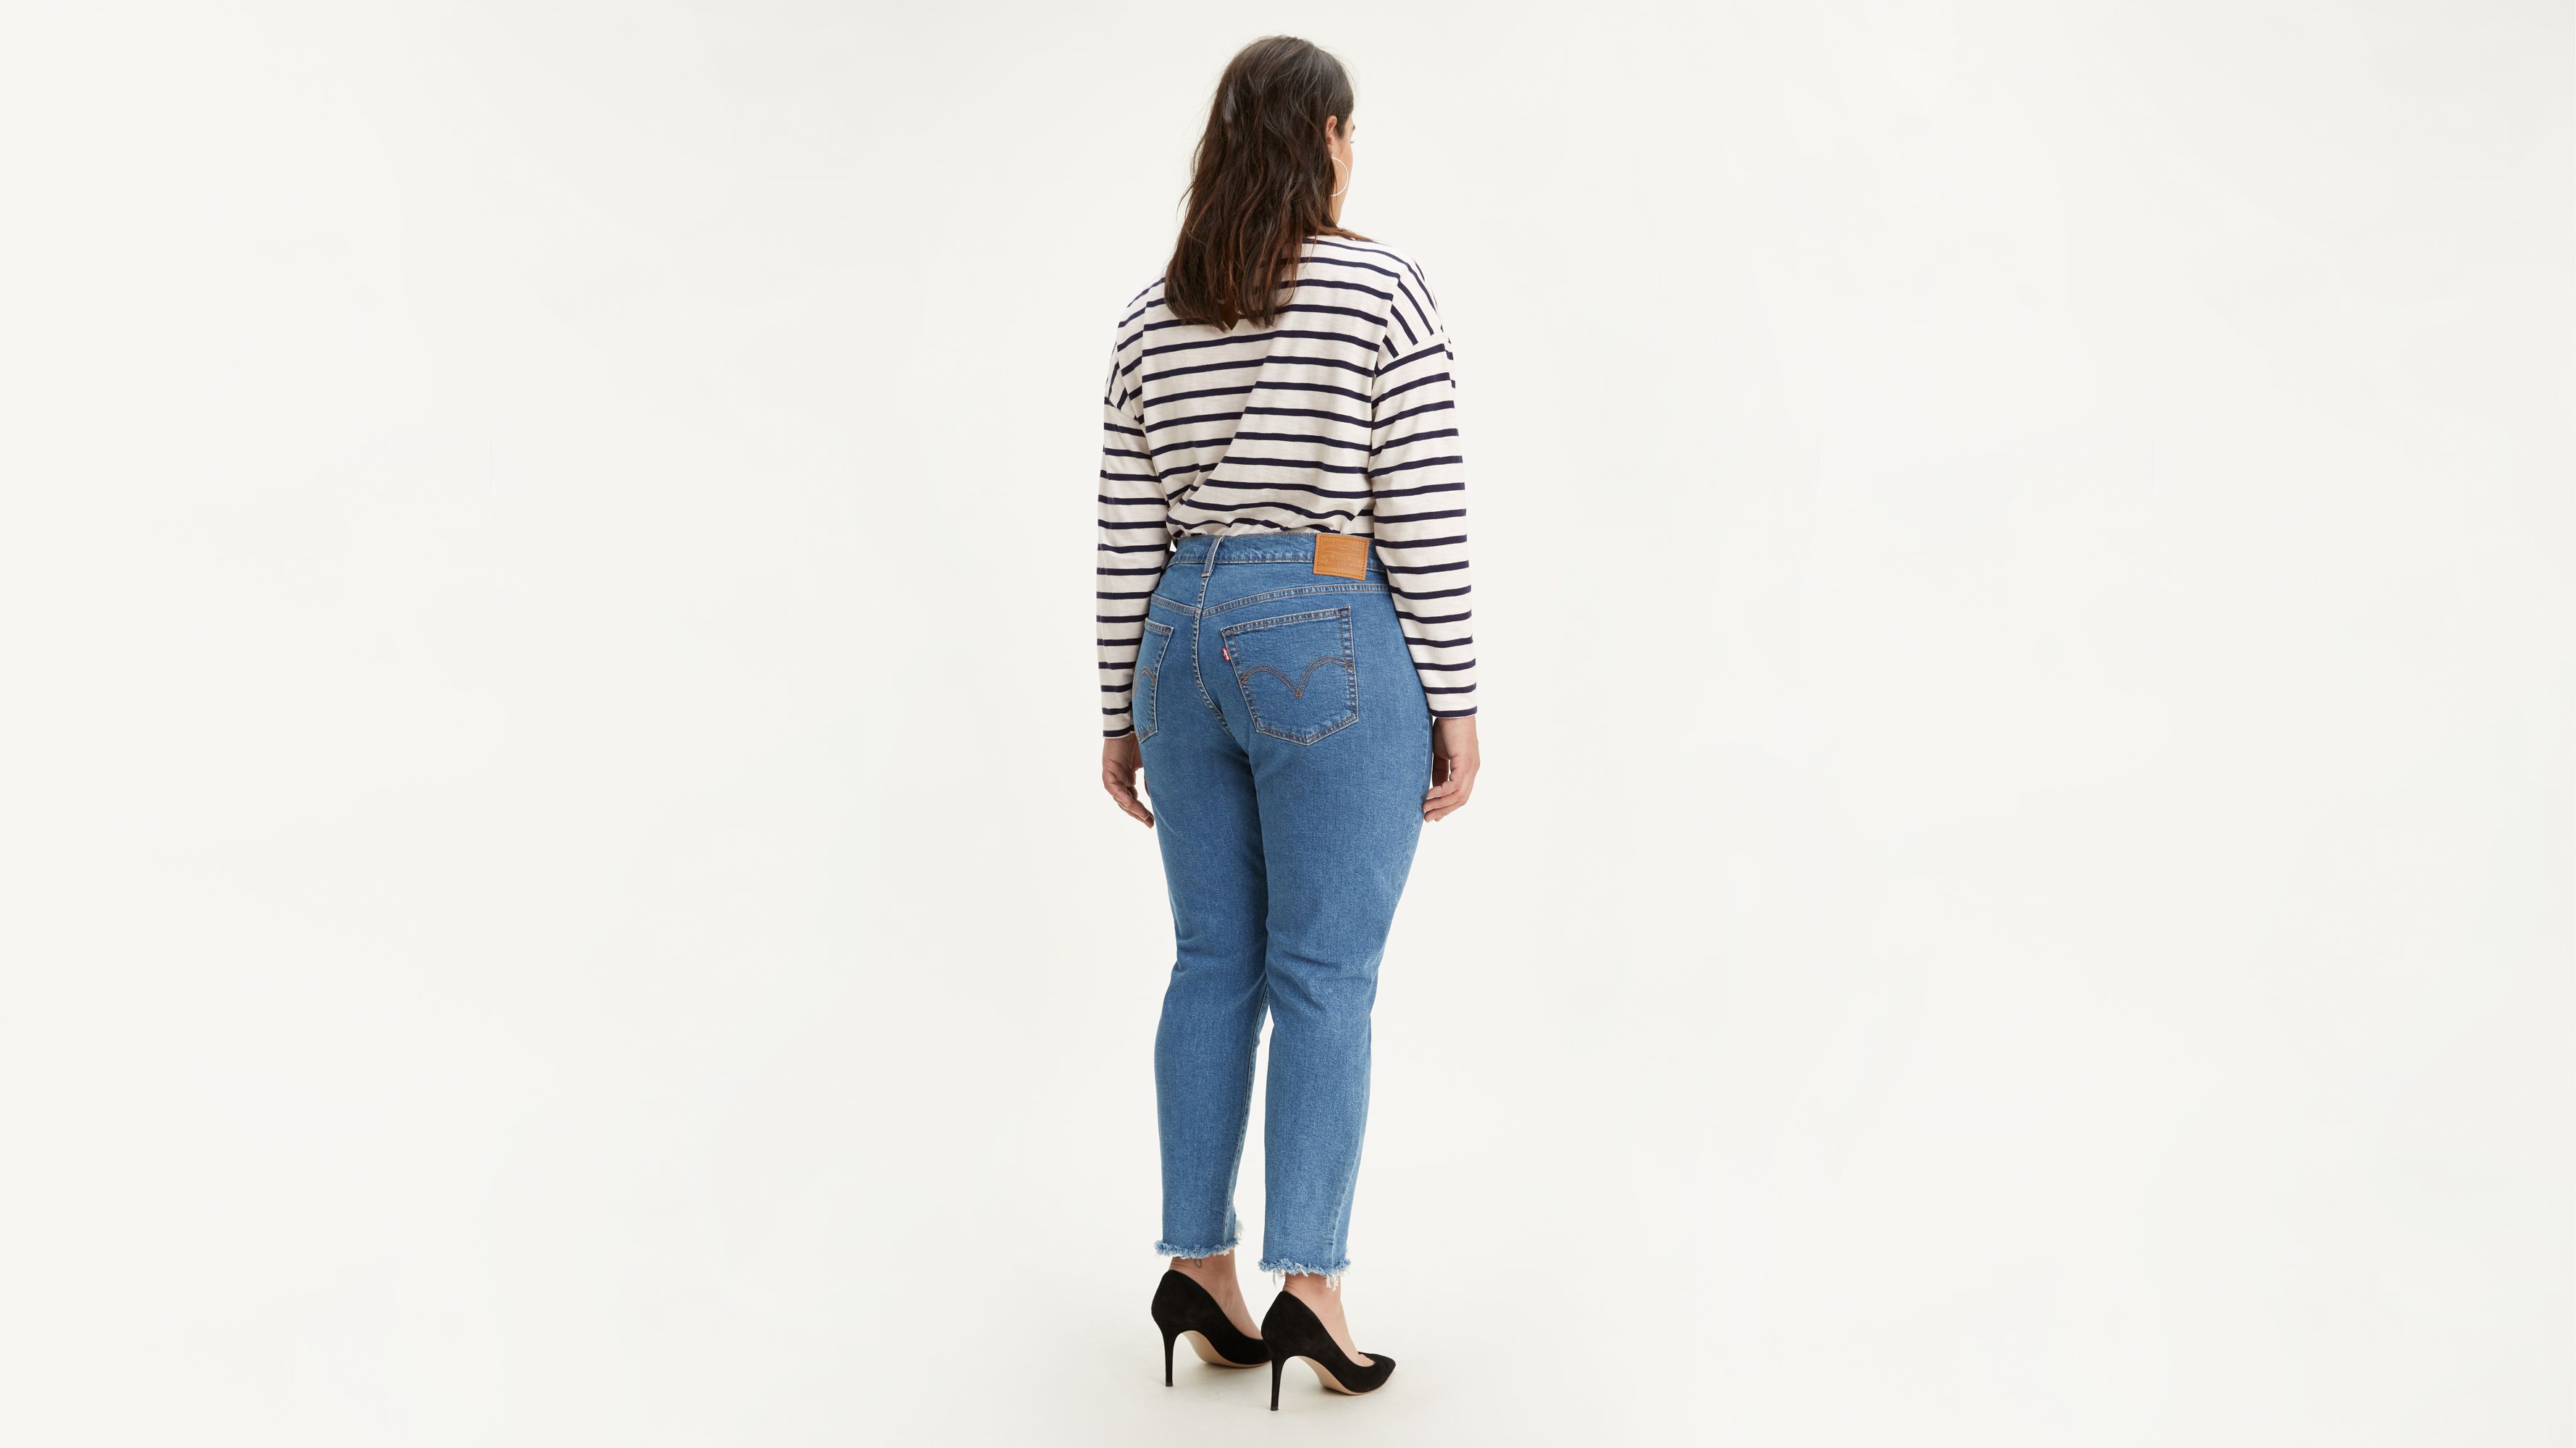 plus size wedgie jeans